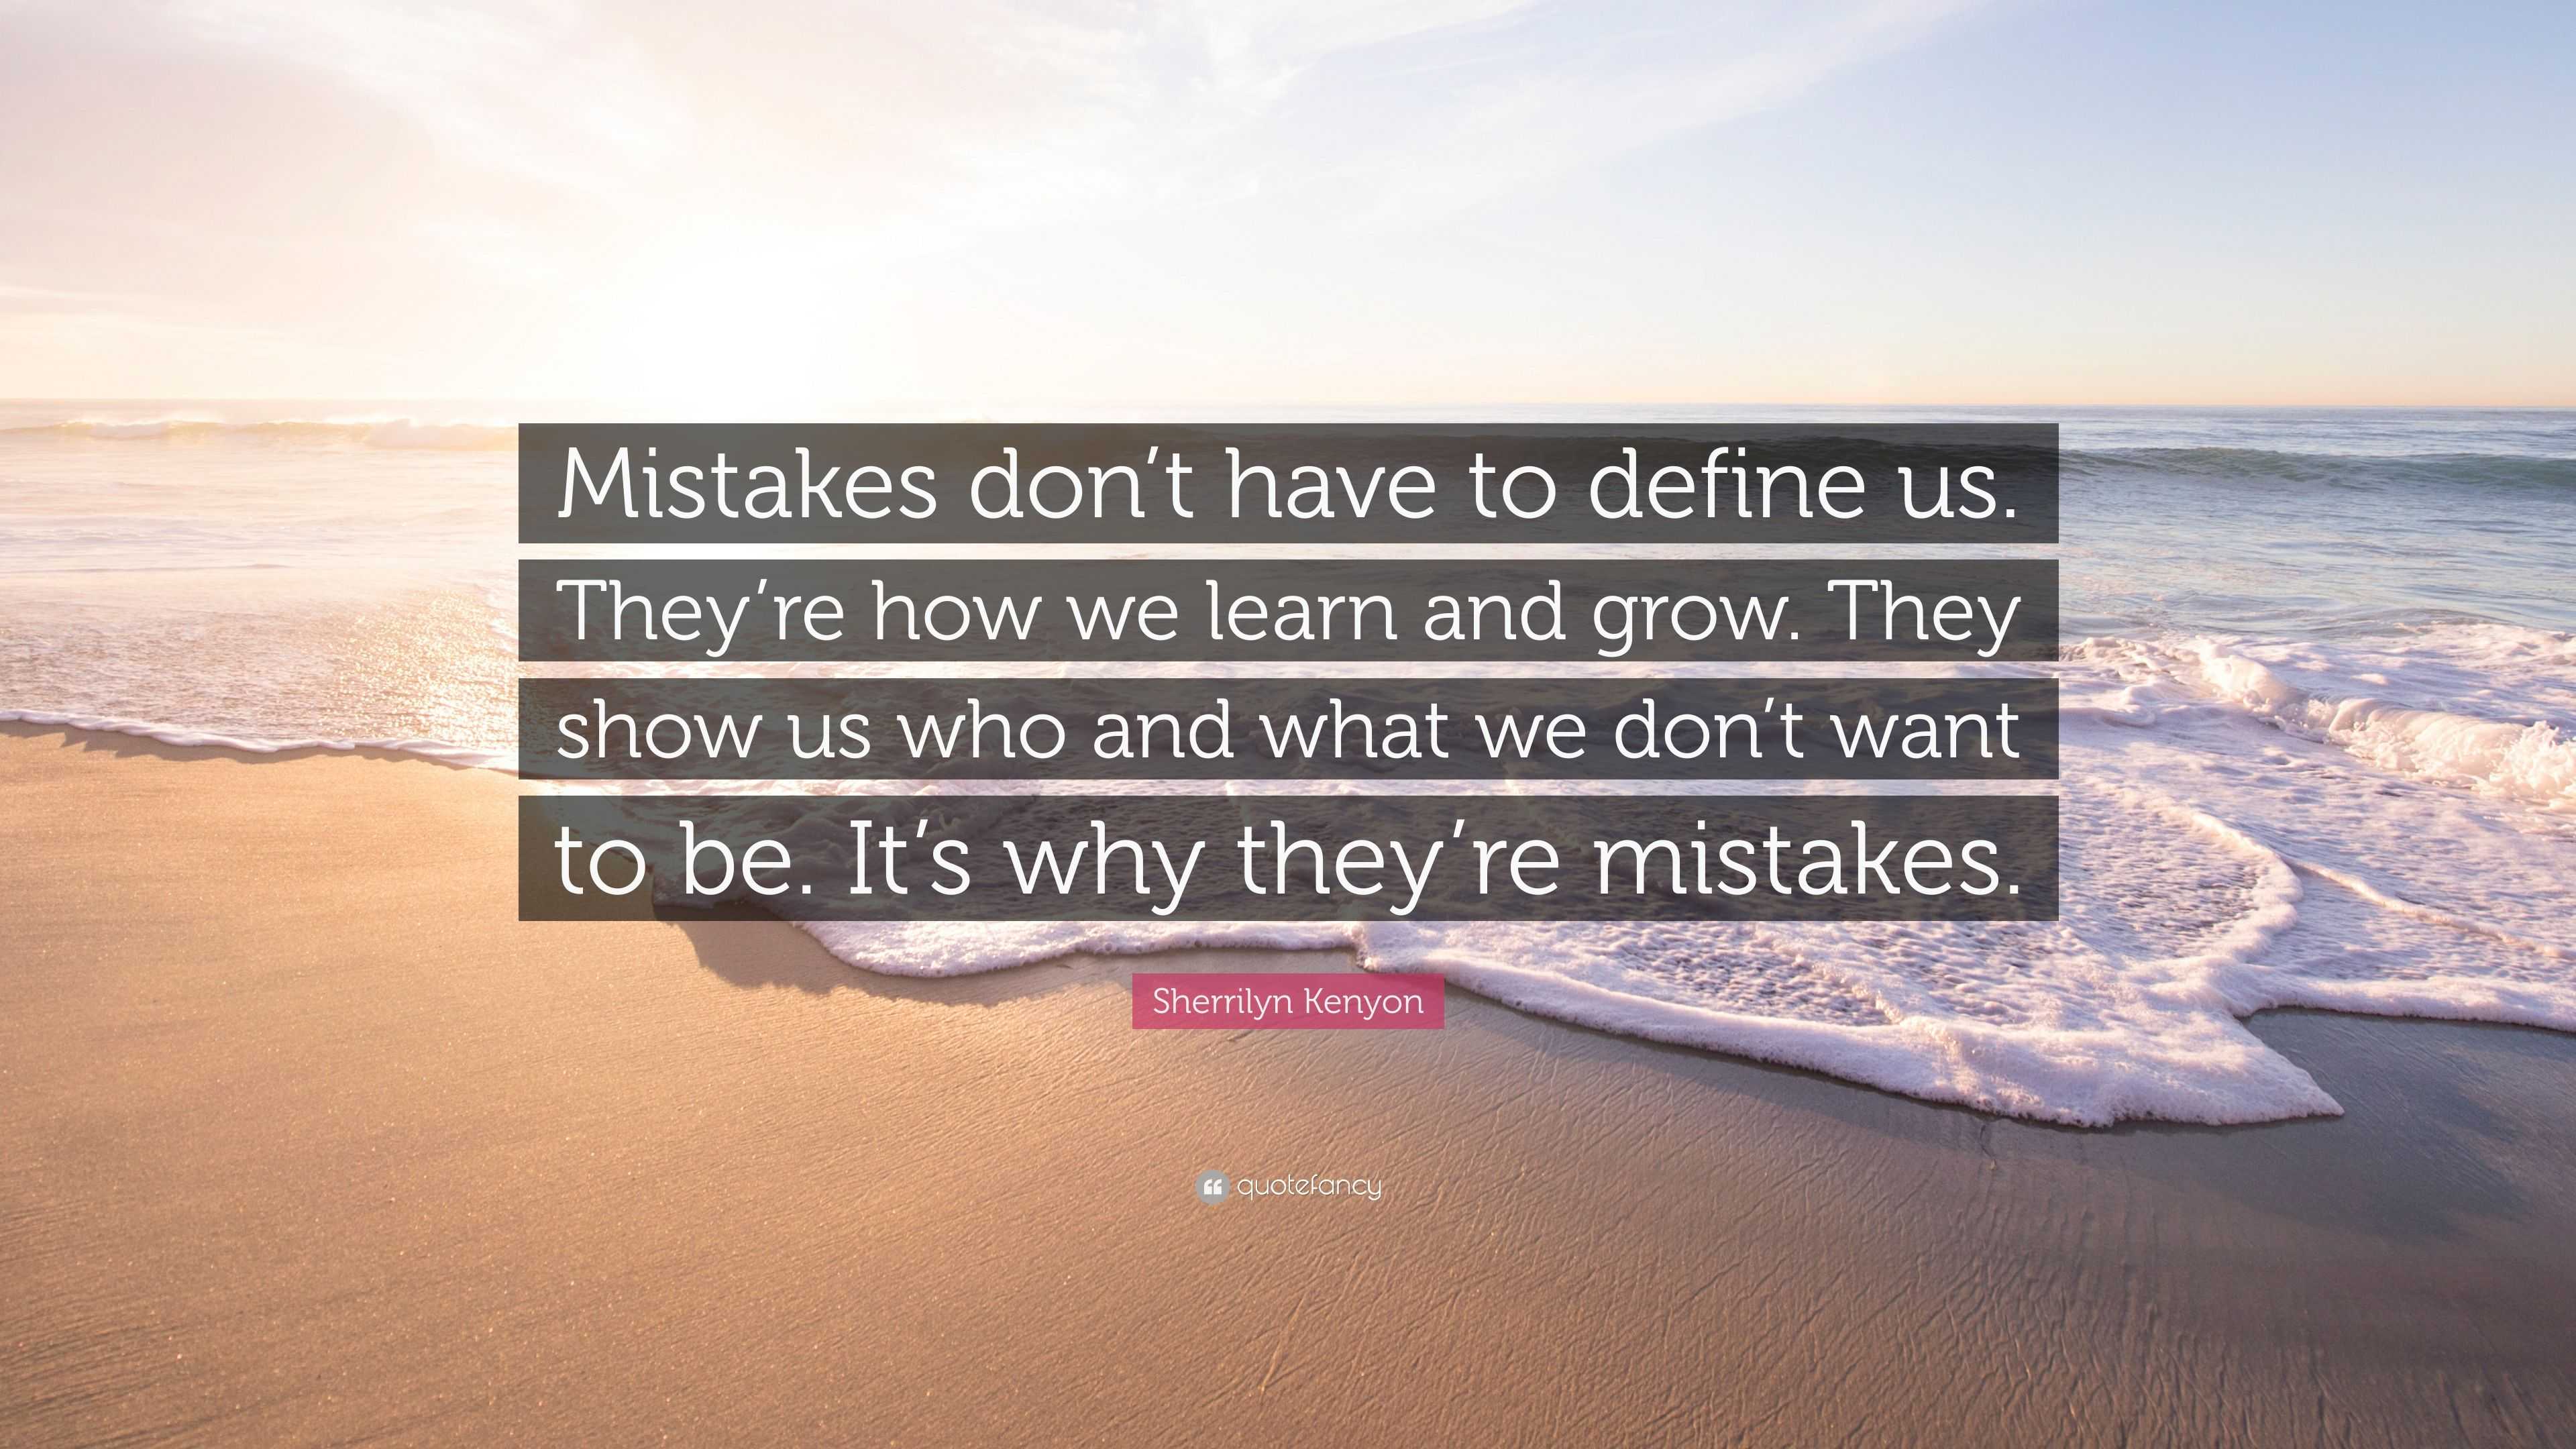 We all make mistakes but our mistakes do not define who we are